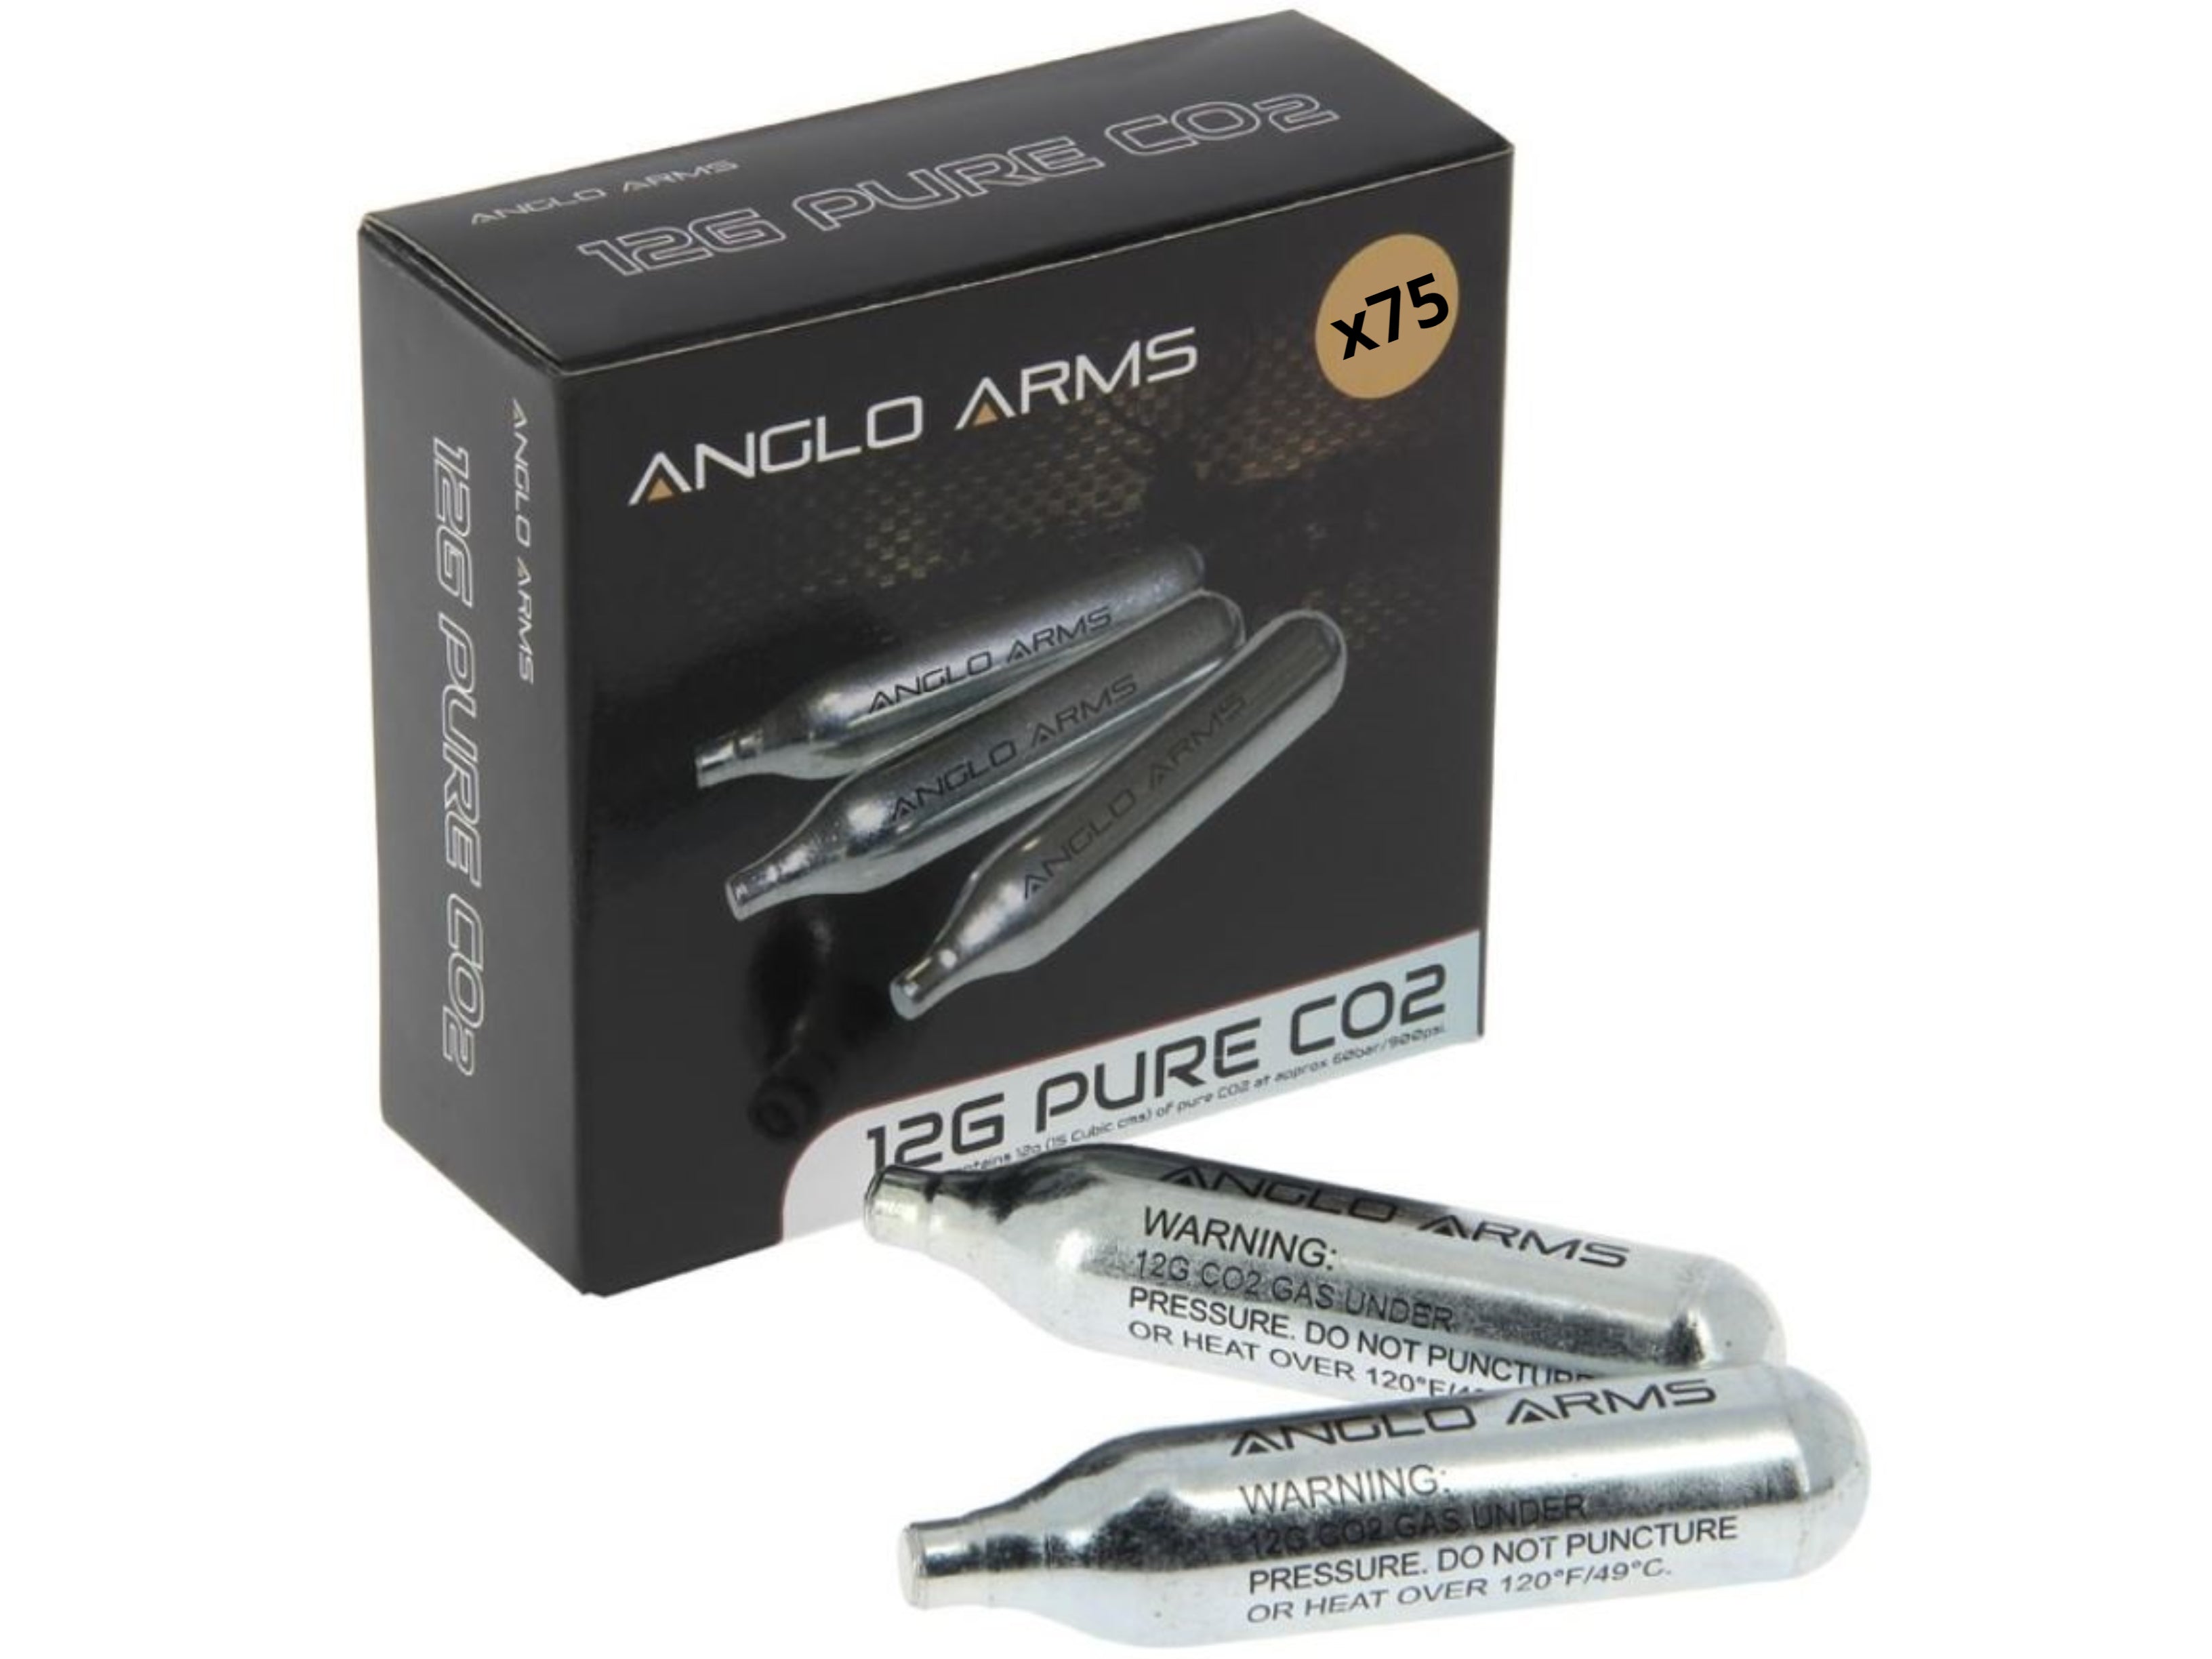 ANGLO ARMS 75 X ANGLO ARMS 12G GRAM CO2 CAPSULE CARTRIDGE SET